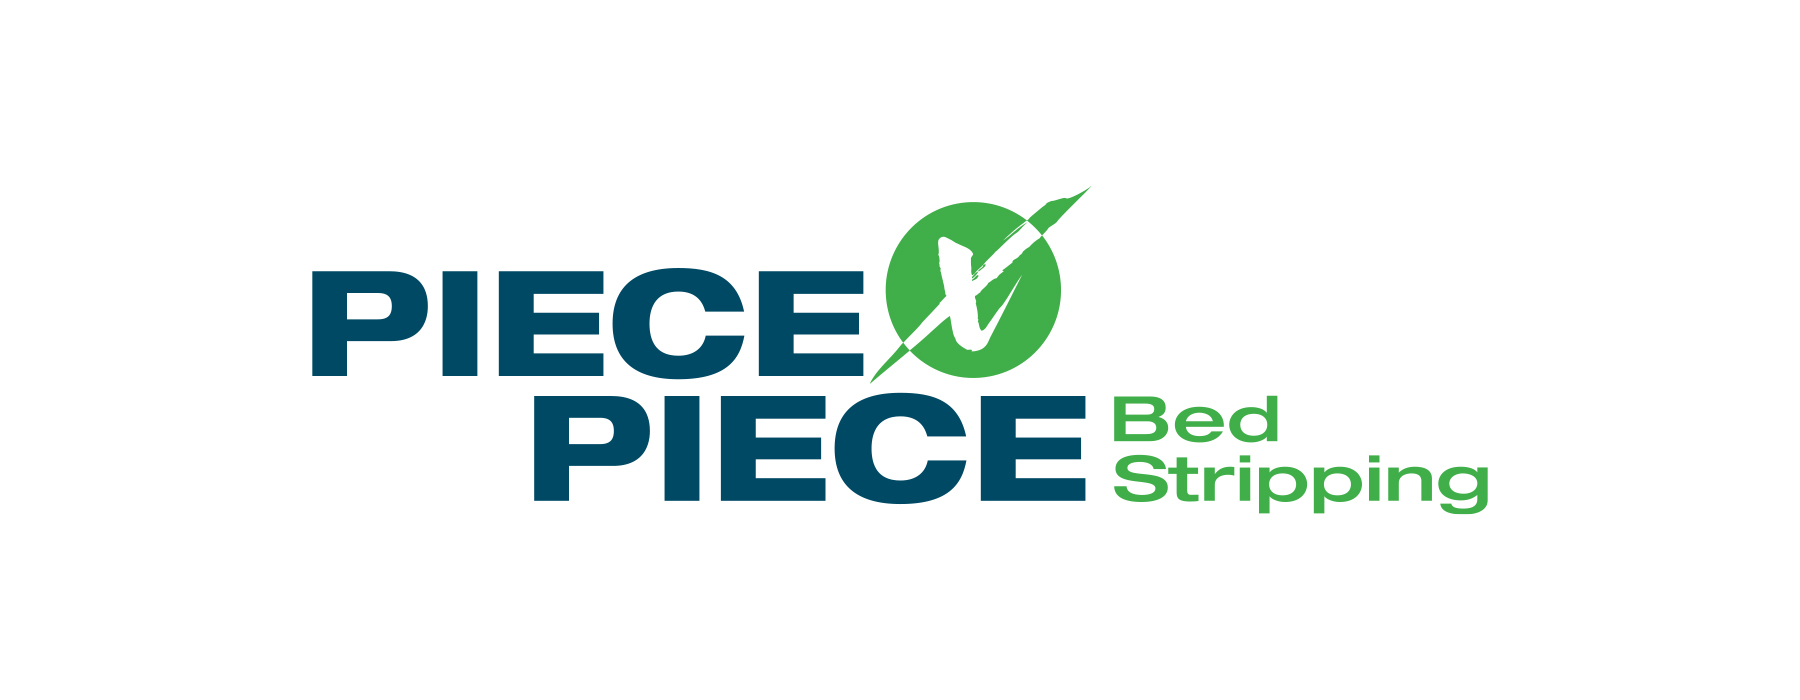 Piece by piece bed stripping